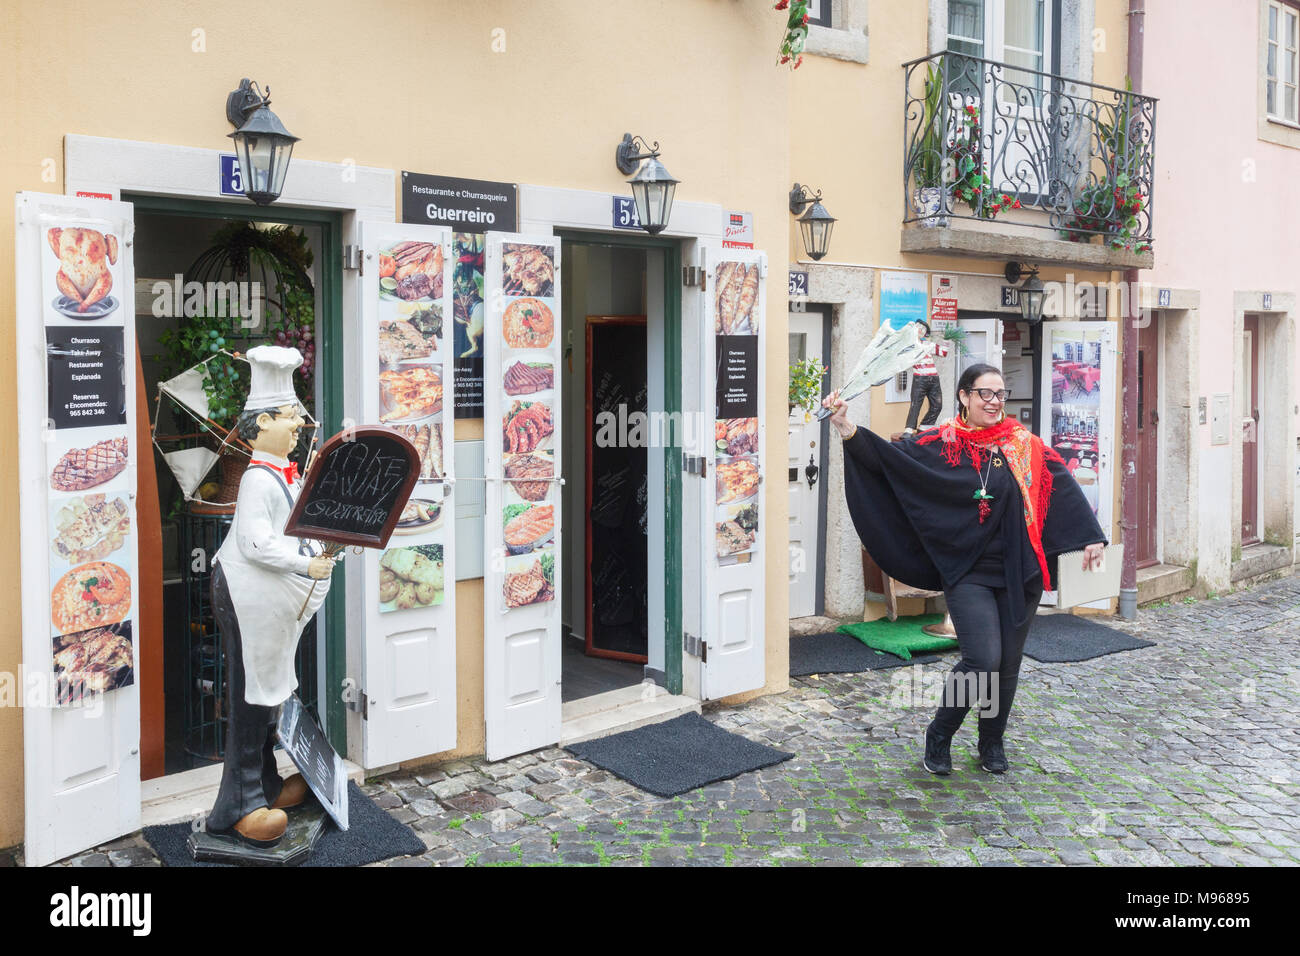 1 March 2018: Lisbon, Portugal - A young woman attracting business outside Restaurant Guerreiro in Lisbon Old Town. She is brandishing a piece of... Stock Photo